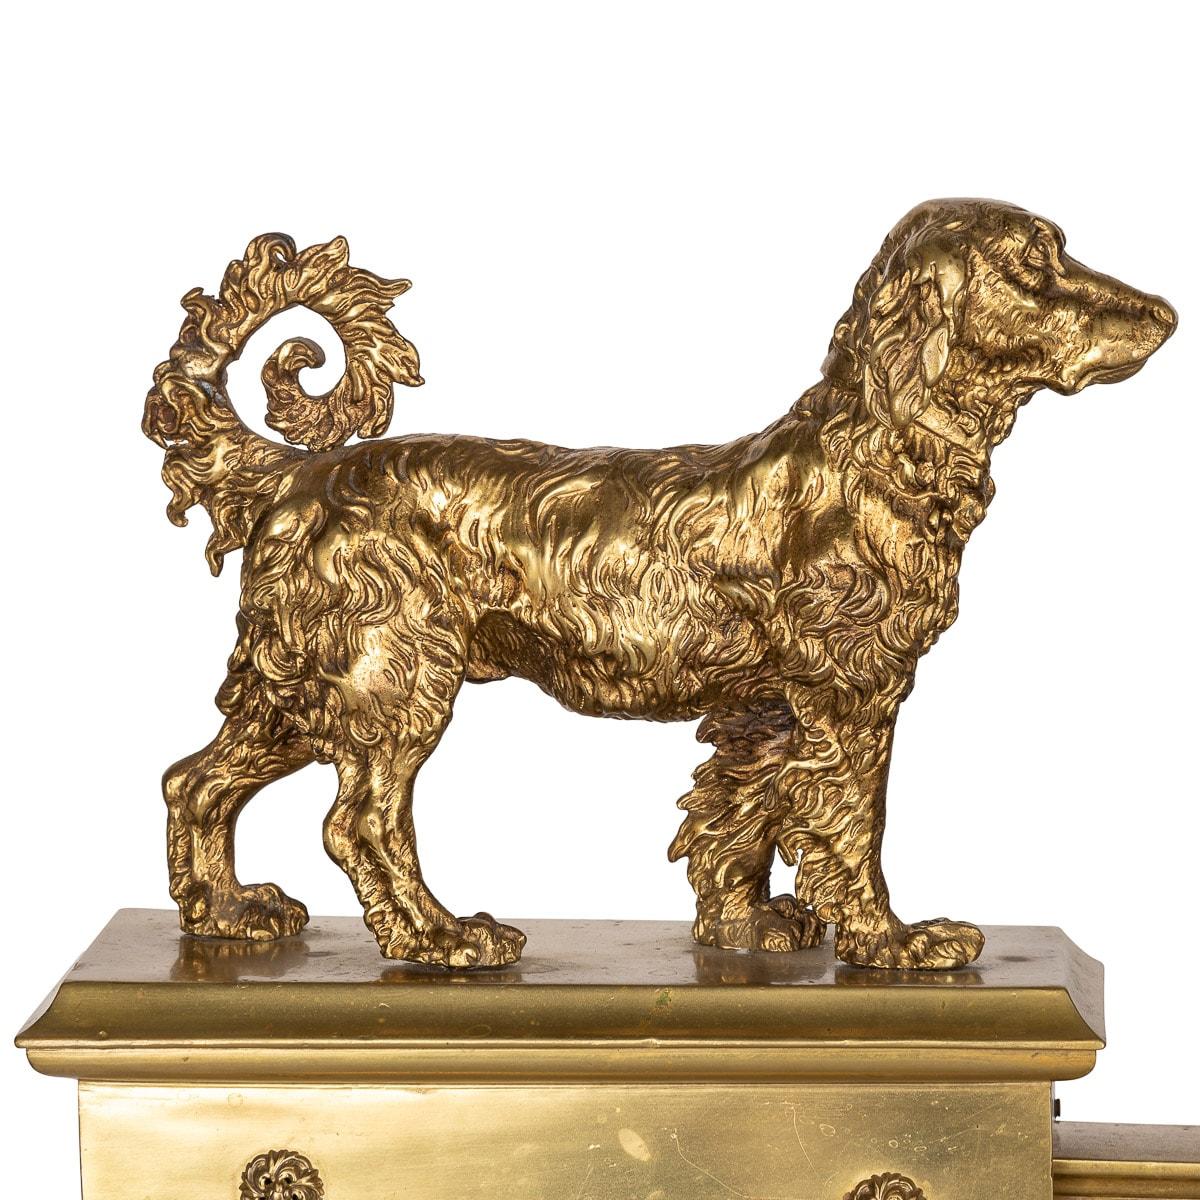 Antique 19th century French ormolu bronze fireplace chenets, decorated with two dogs facing each other standing on square plinths decorated with cast resets, joined together by a pierced floral grill.

CONDITION
In Good Condition, please refer to